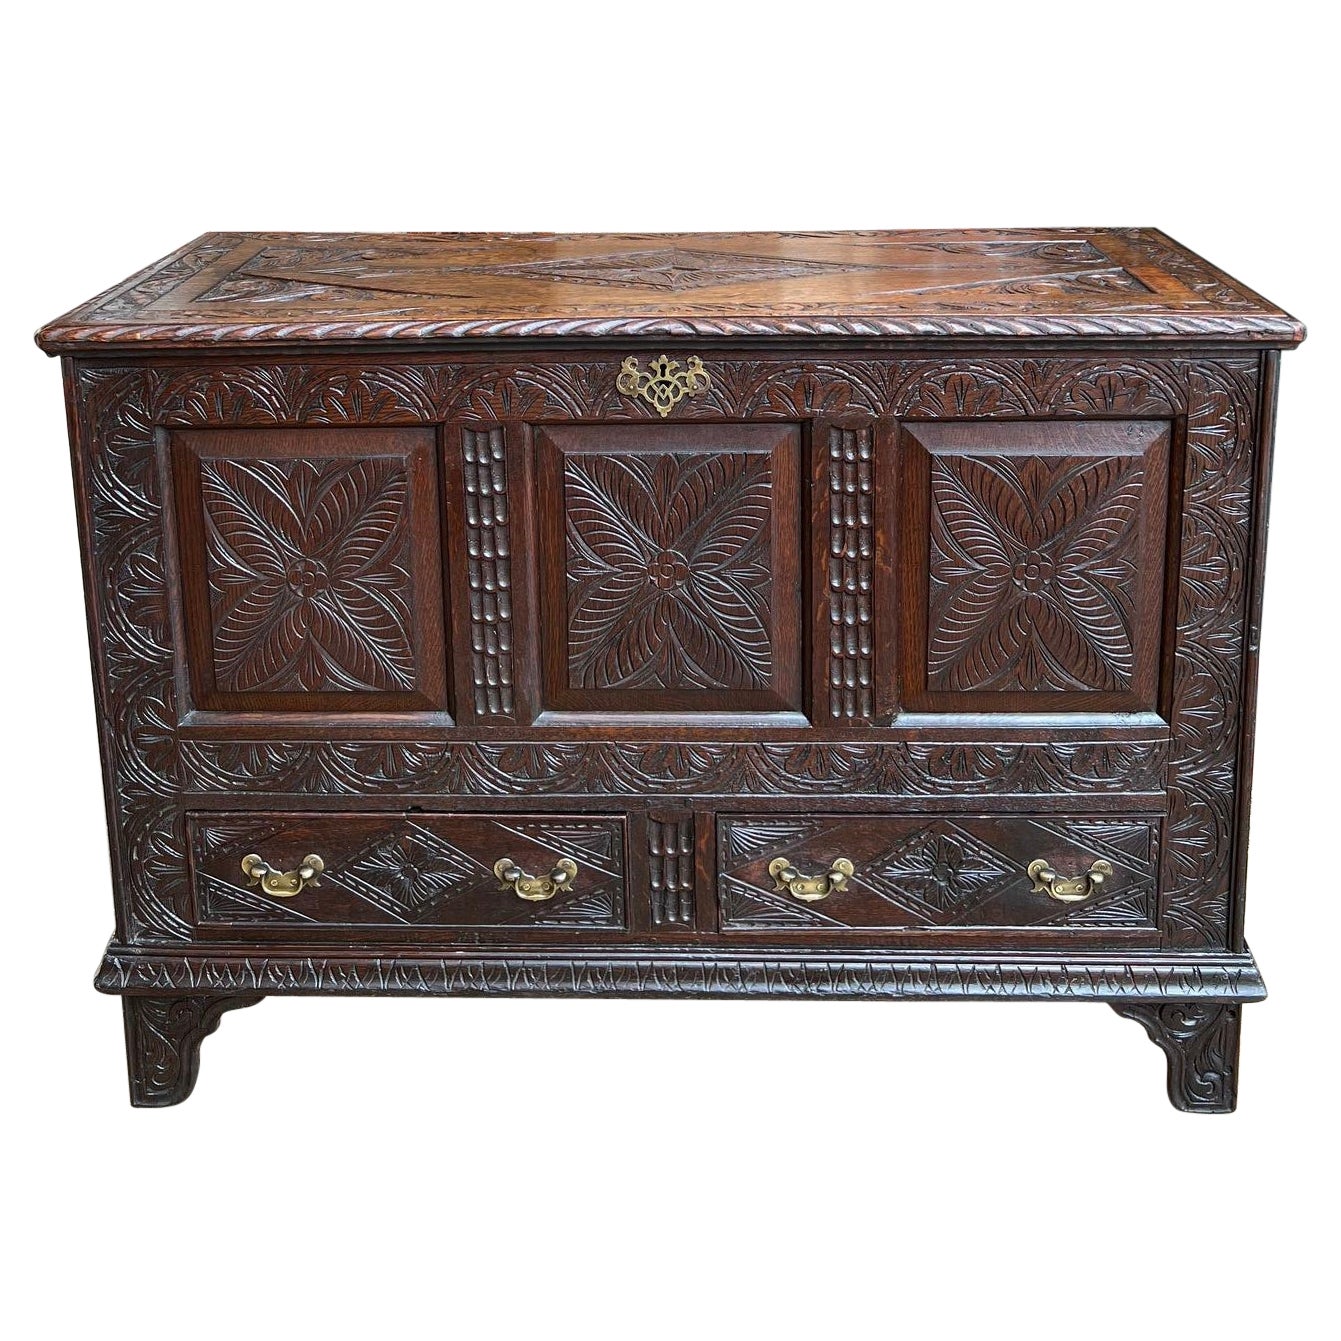 Antique English Trunk Coffer Blanket Chest Carved Oak Foyer Table Wedding Chest